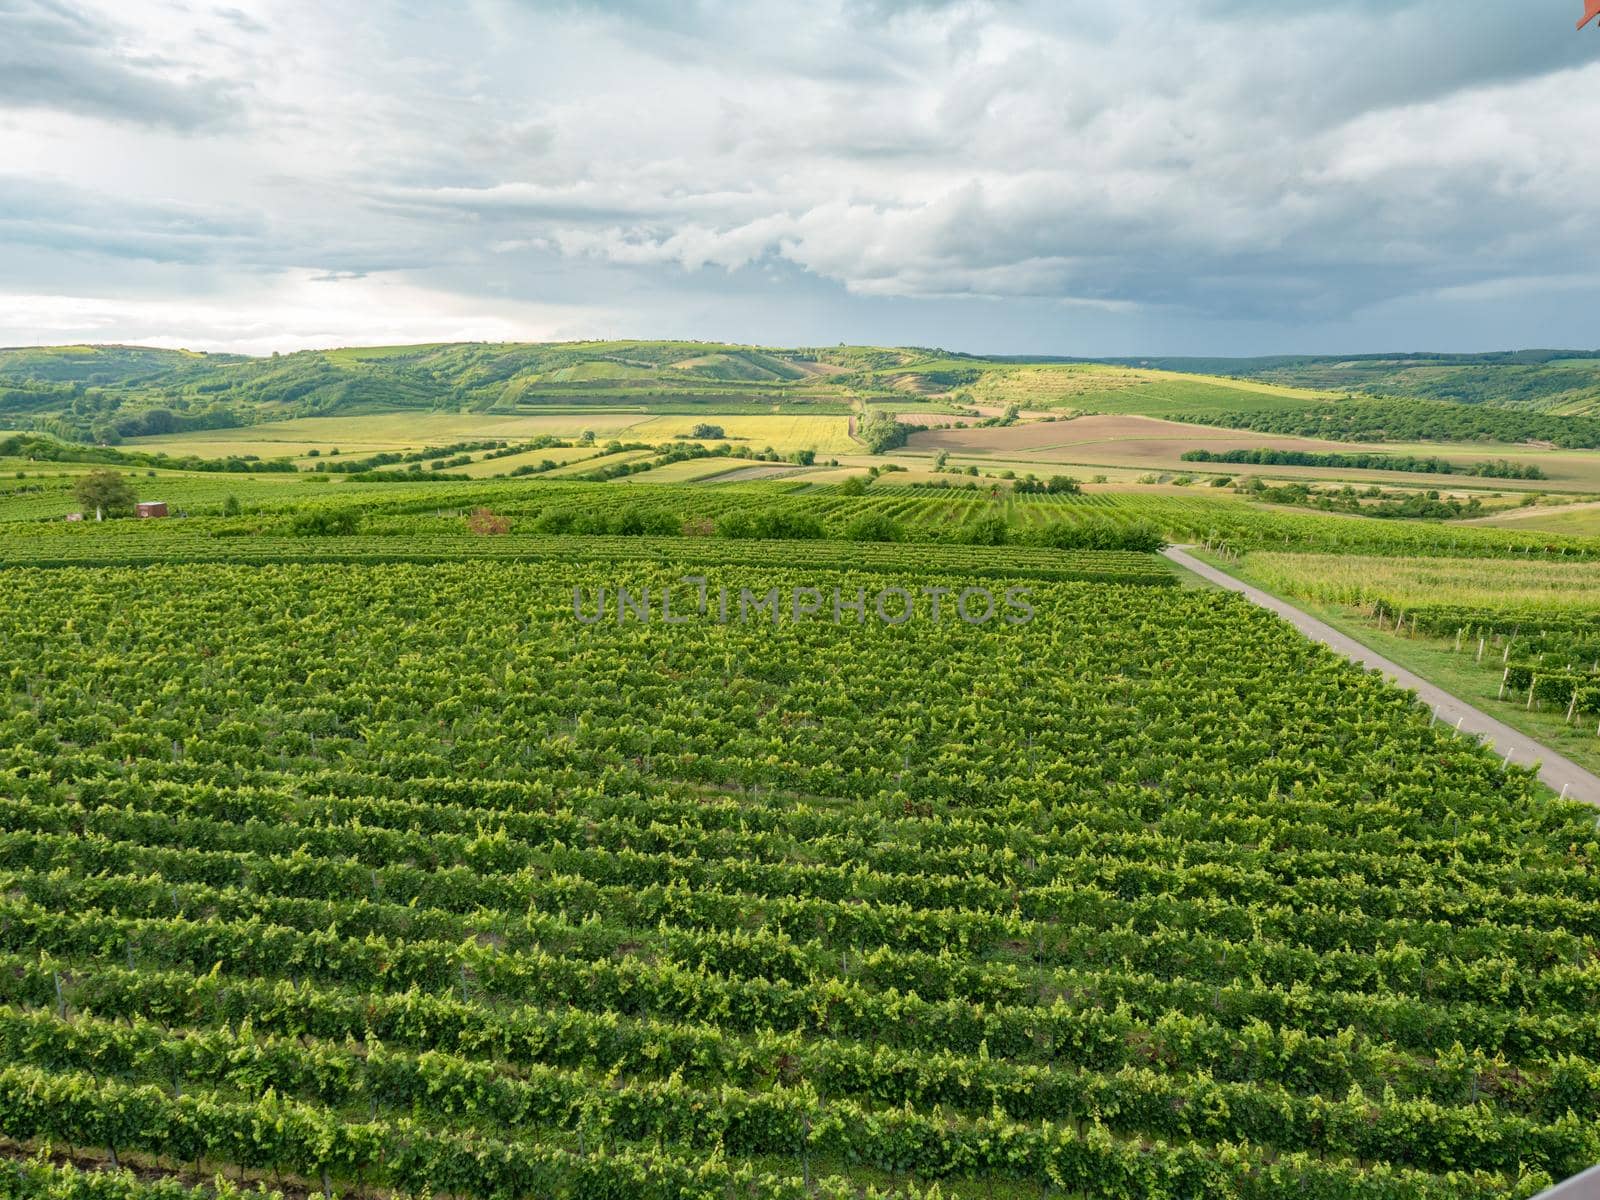 Old family vineyards form a traditional landscape. View from drone or viewtower. Palava hills vinery region South Moravia, Czech Republic.